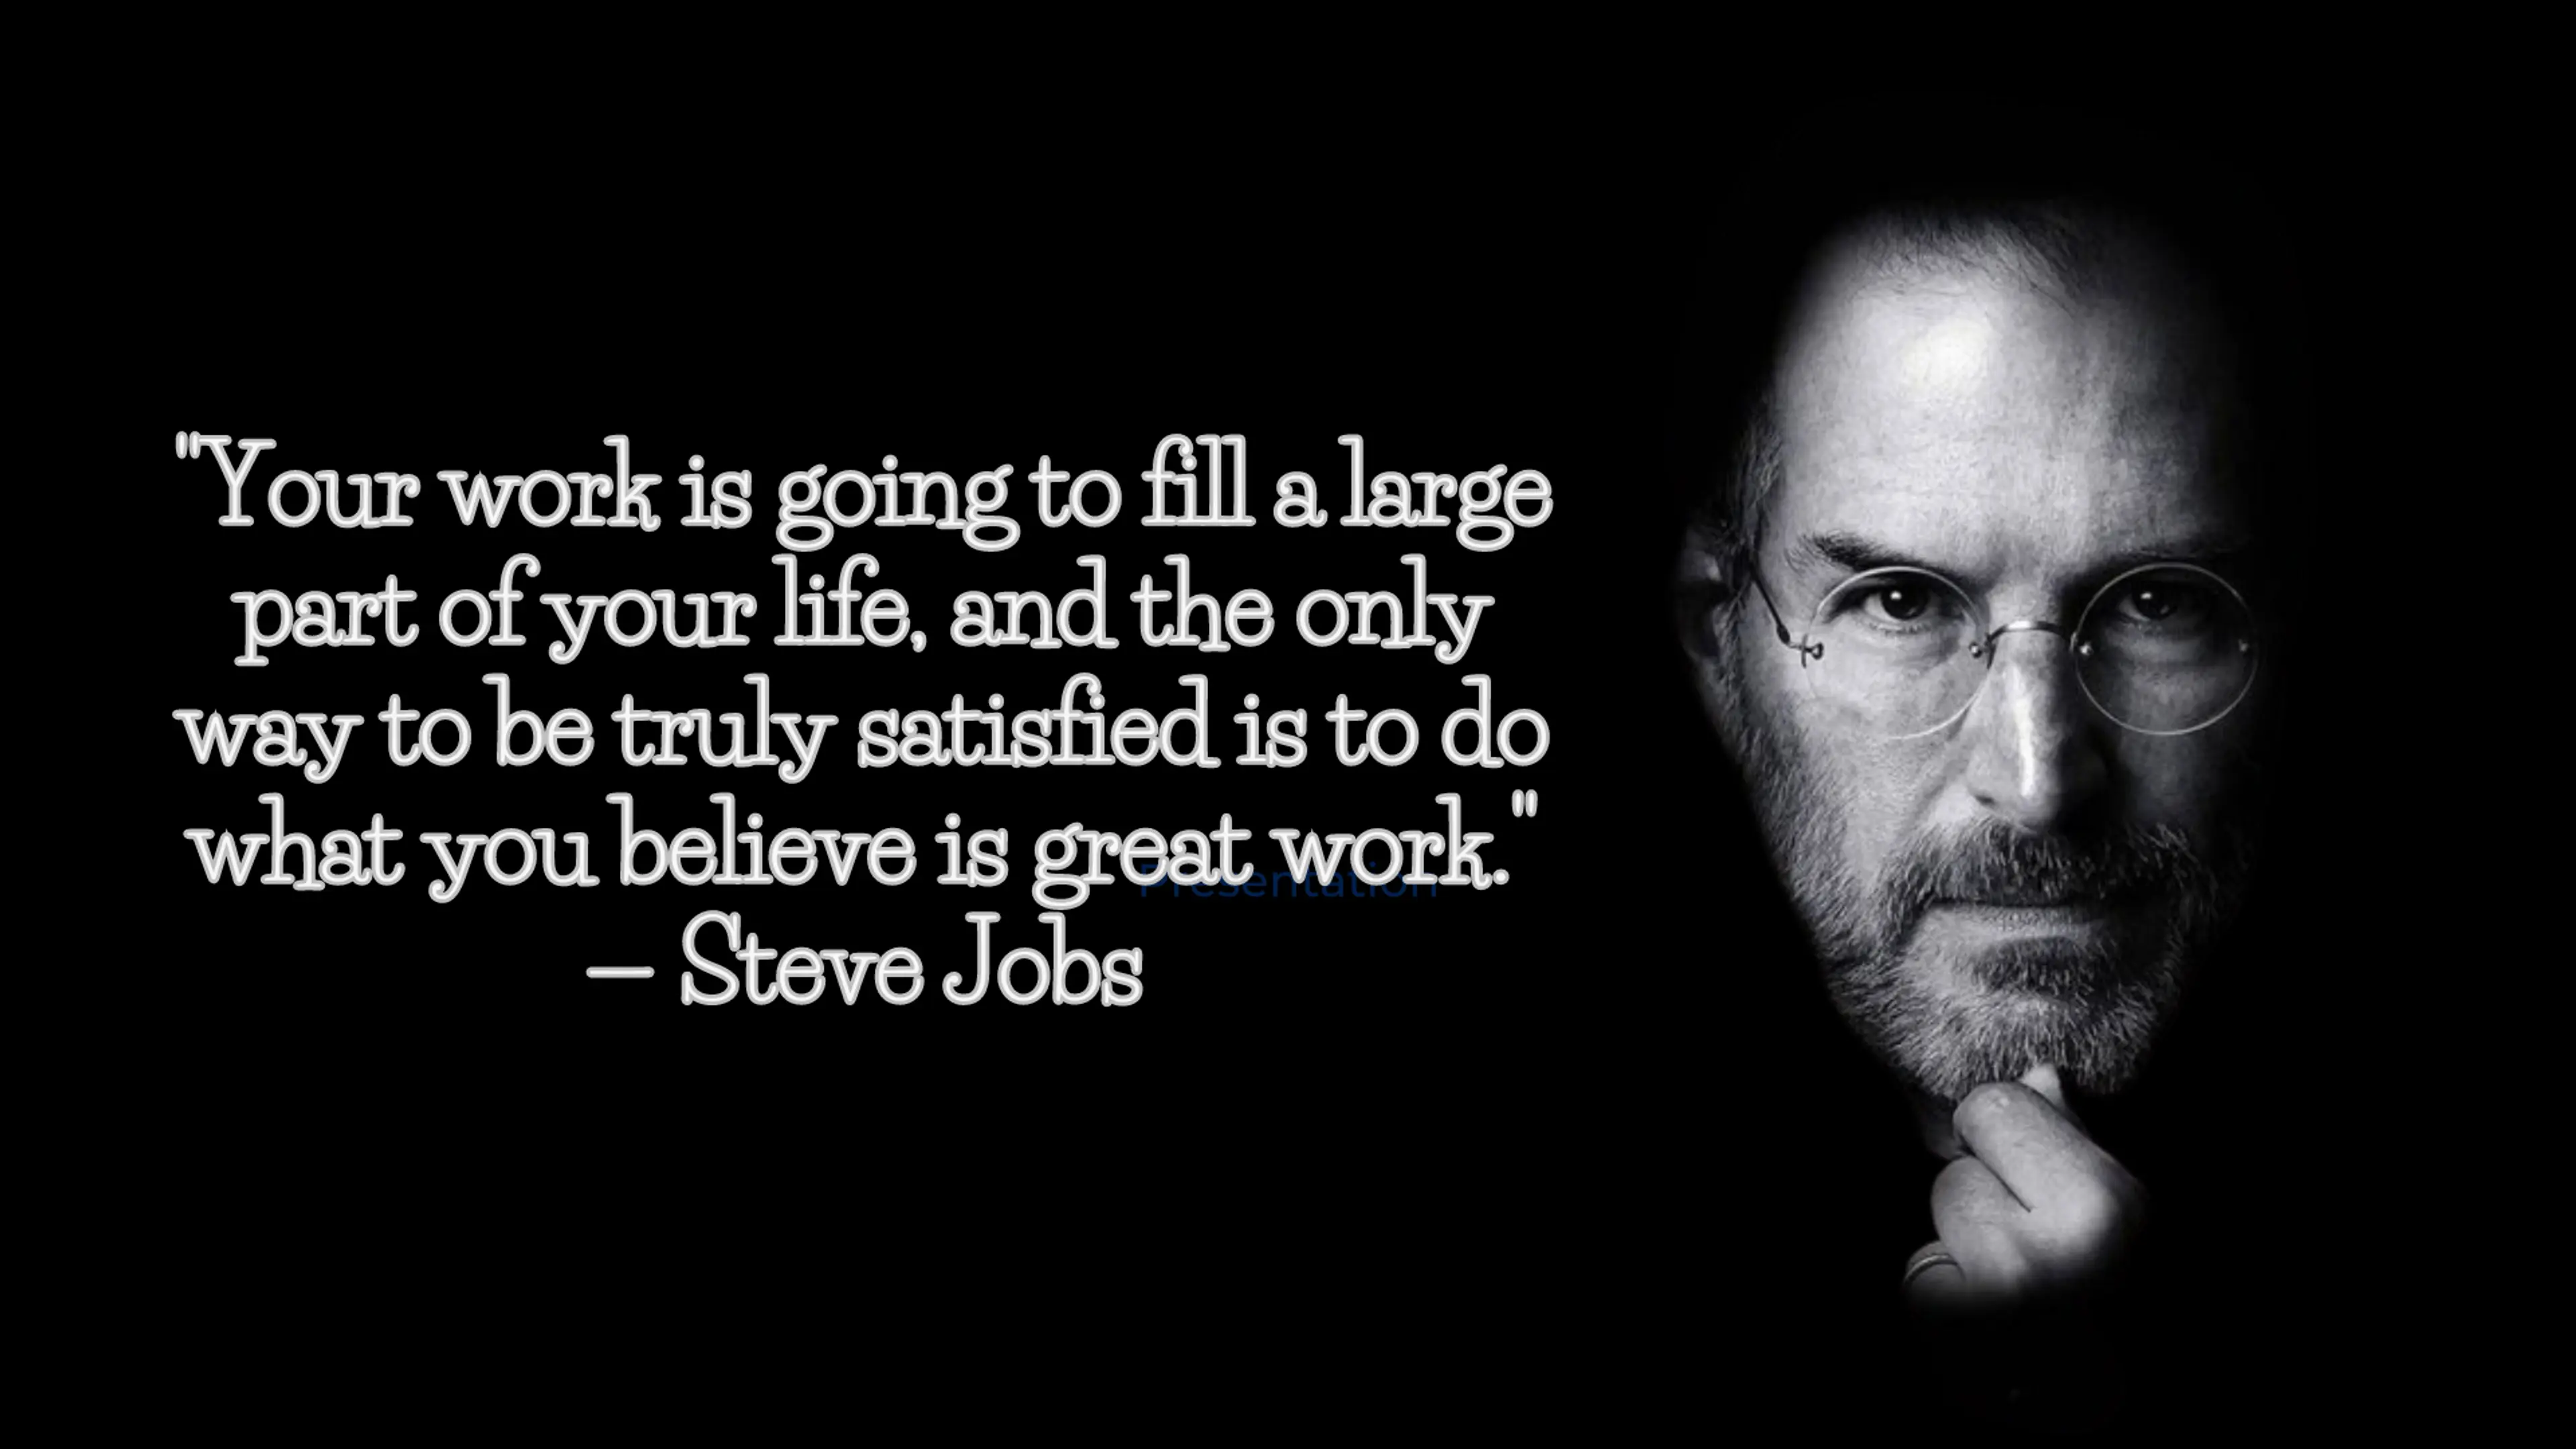 Steve Jobs' wisdom: 10 powerful quotes for success